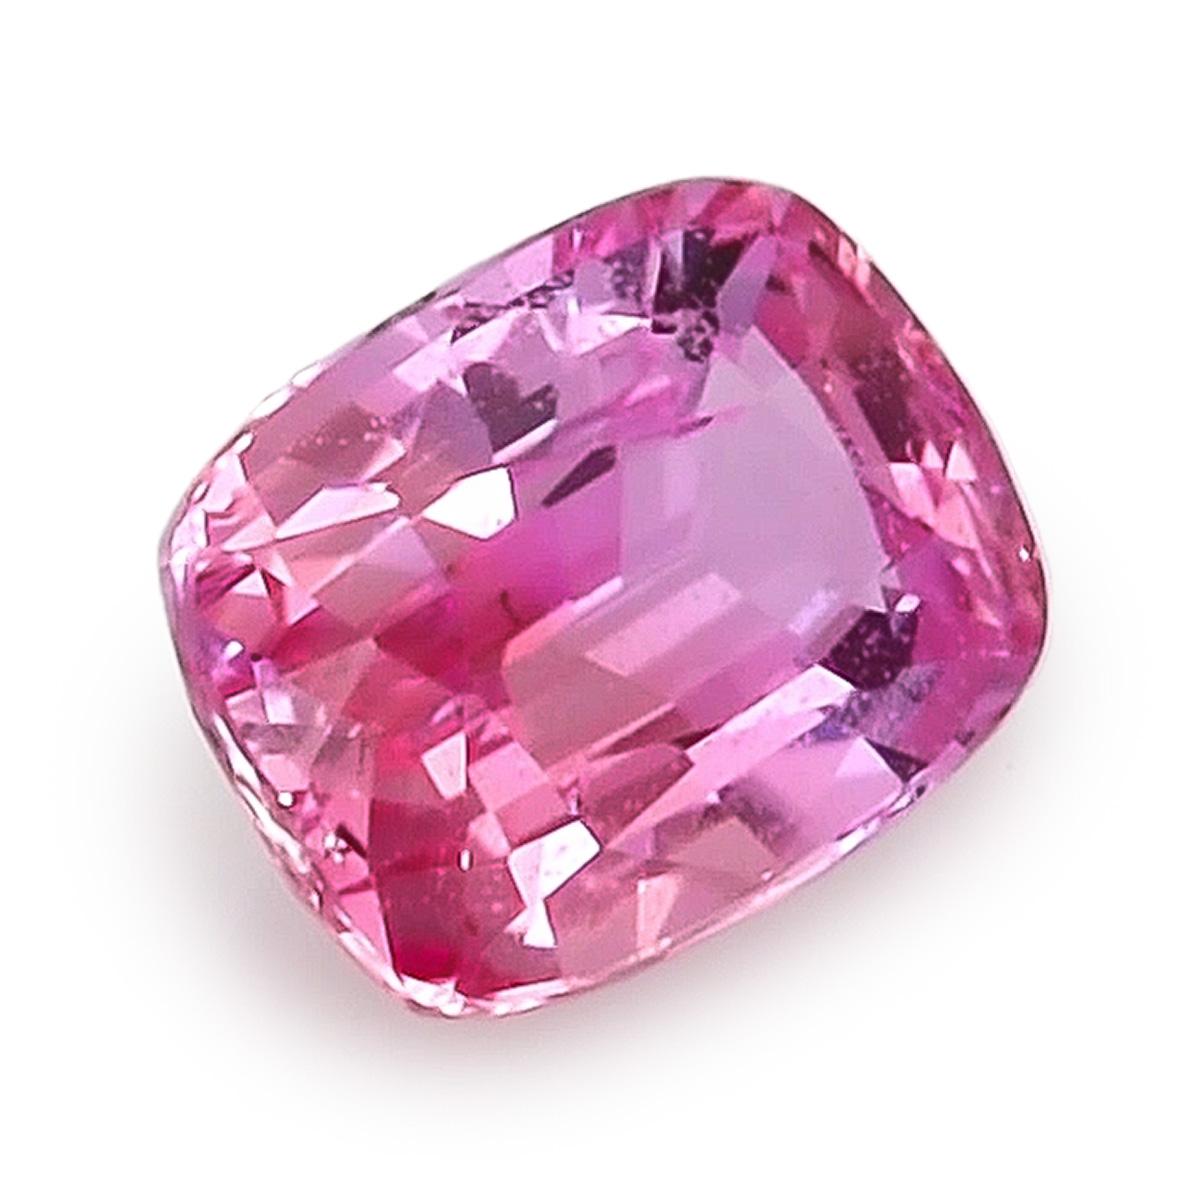 Identification: Natural Pink Sapphire

• Carat: 0.81 carats
• Shape: Cushion
• Measurement: 5.81 x 4.47 x 3.08 mm
• Color: Pink
• Cut: Brilliant/step
• Origin: Sri Lanka
• Clarity: very eye clean
• Treatment: Heated

Discover the exquisite charm of